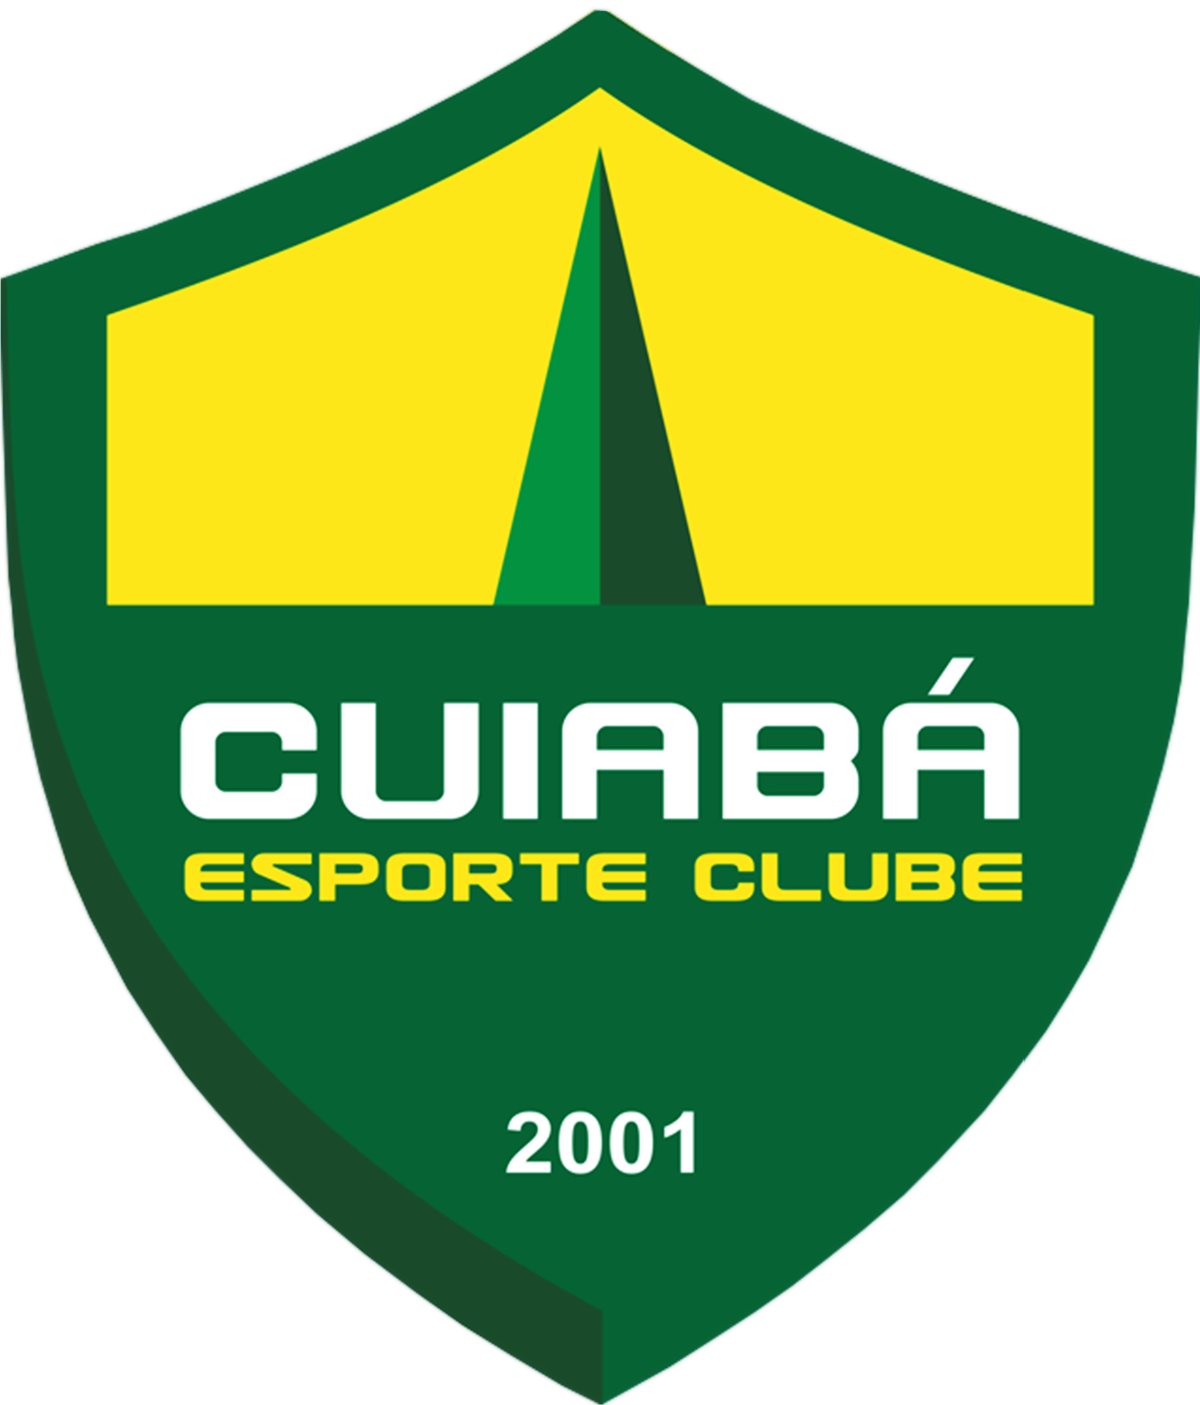 Cuiabá vs Internacional Prediction: Expect an evenly matched contest